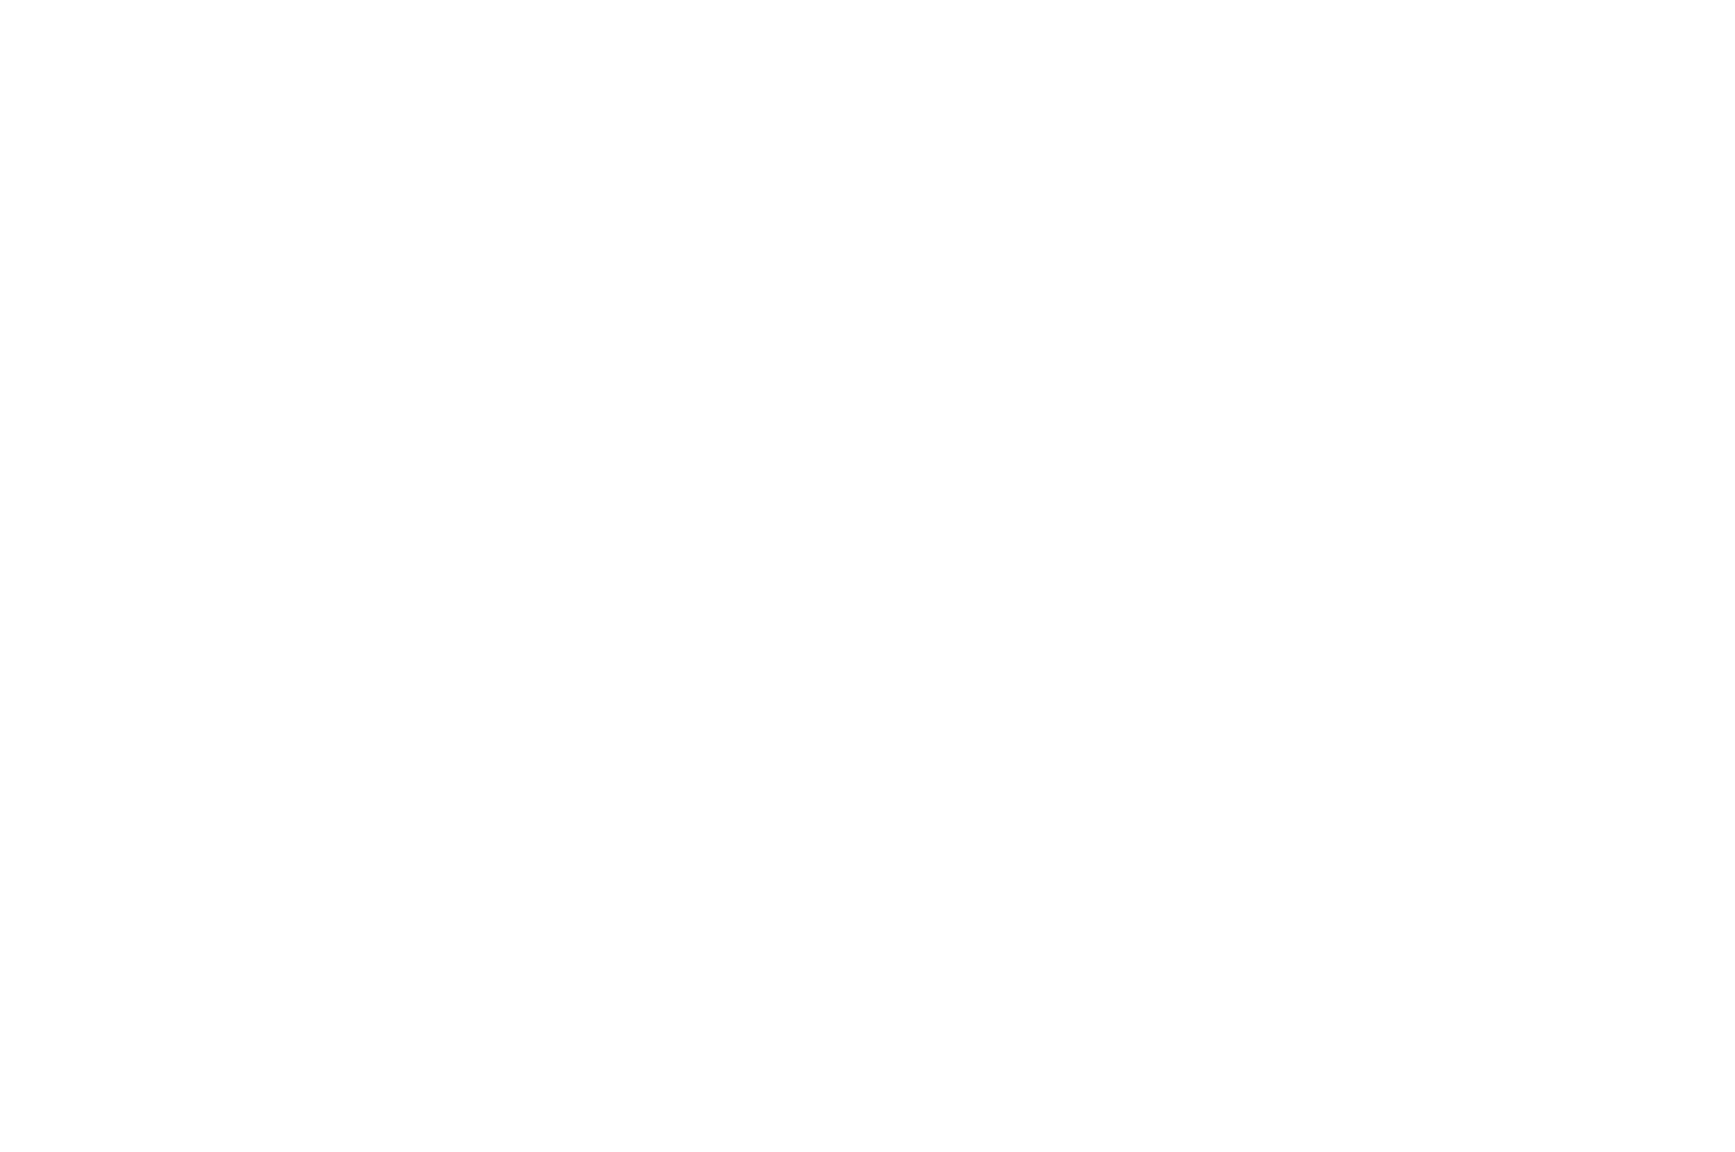 OFFICIAL SELECTION - Horror Bowl Movie Awards - 2019.png